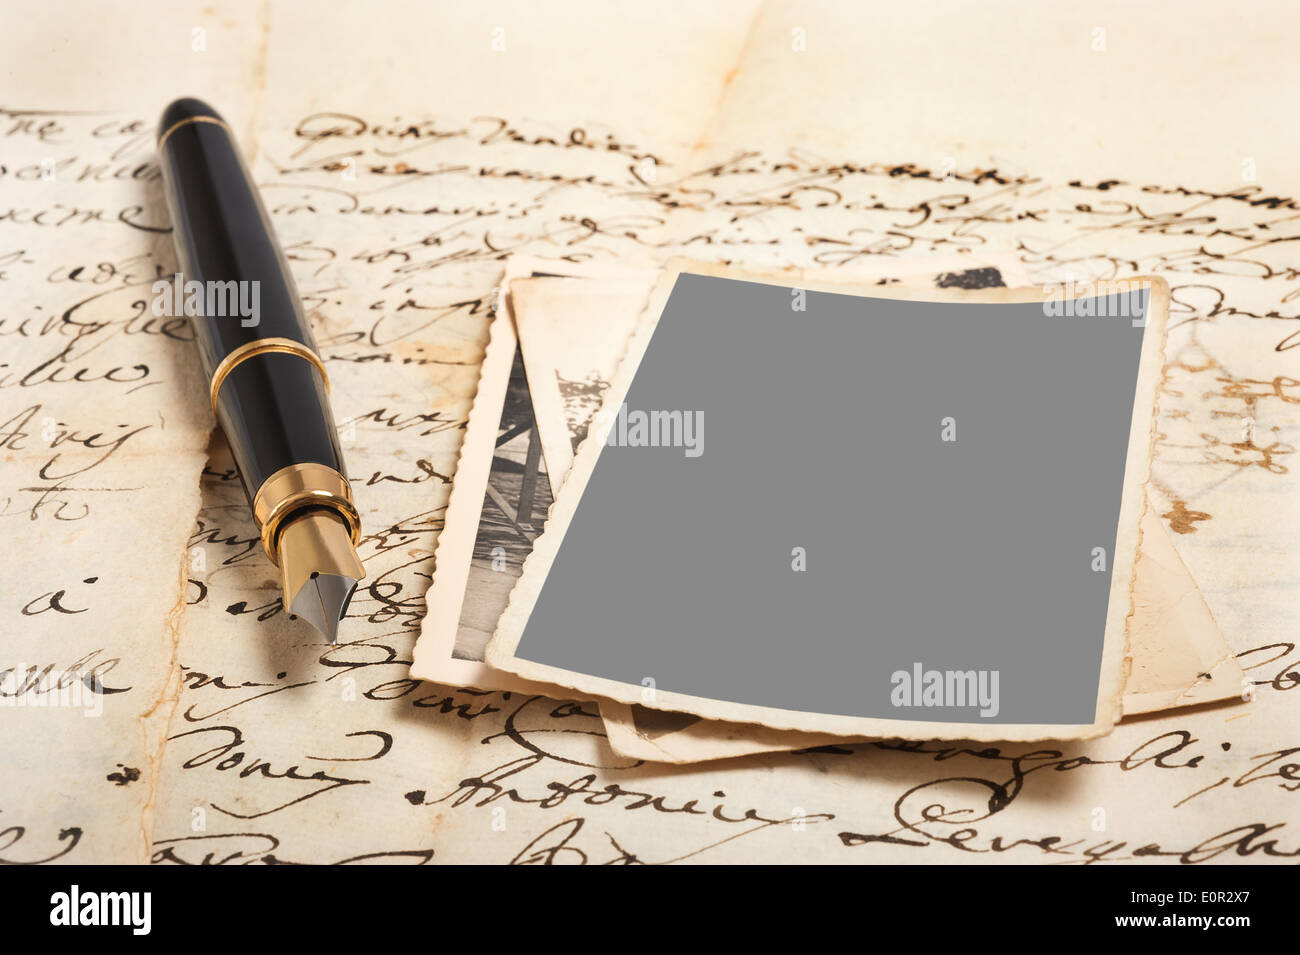 Fountain pen and pictures on old letters Stock Photo